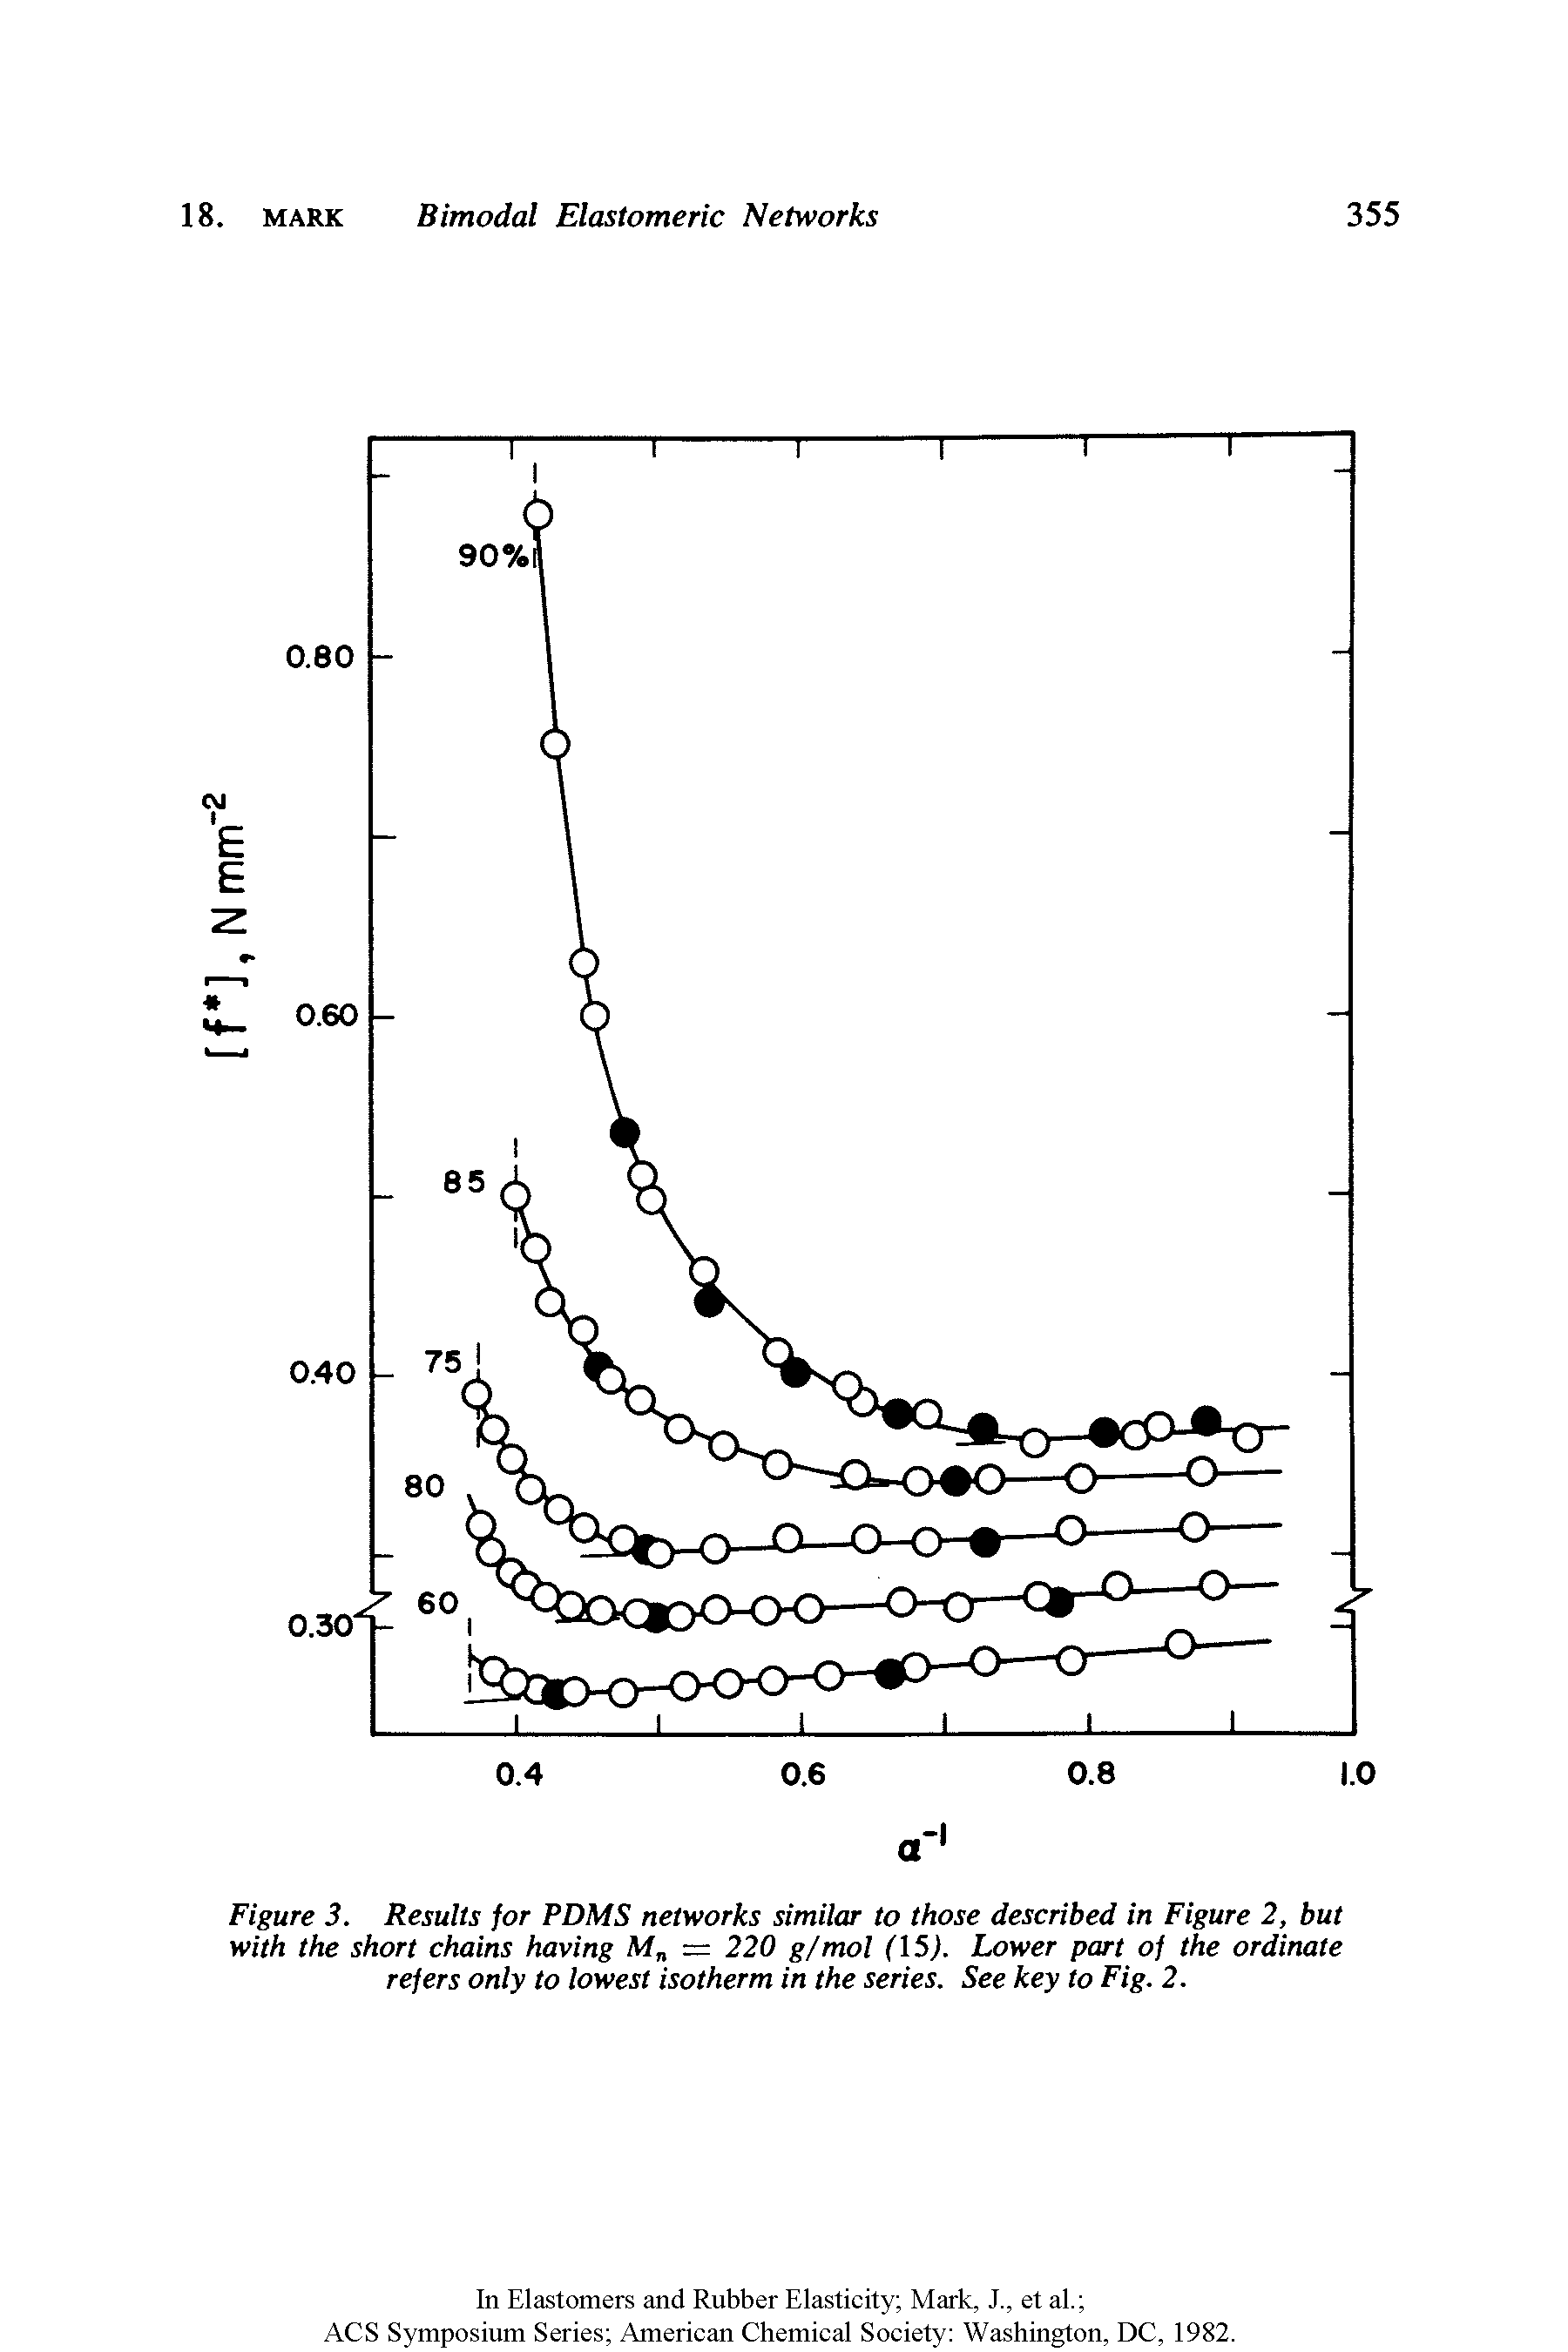 Figure 3. Results for PDMS networks similar to those described in Figure 2, but with the short chains having M — 220 g/mol (15J. Lower part of the ordinate refers only to lowest isotherm in the series. See key to Fig. 2.